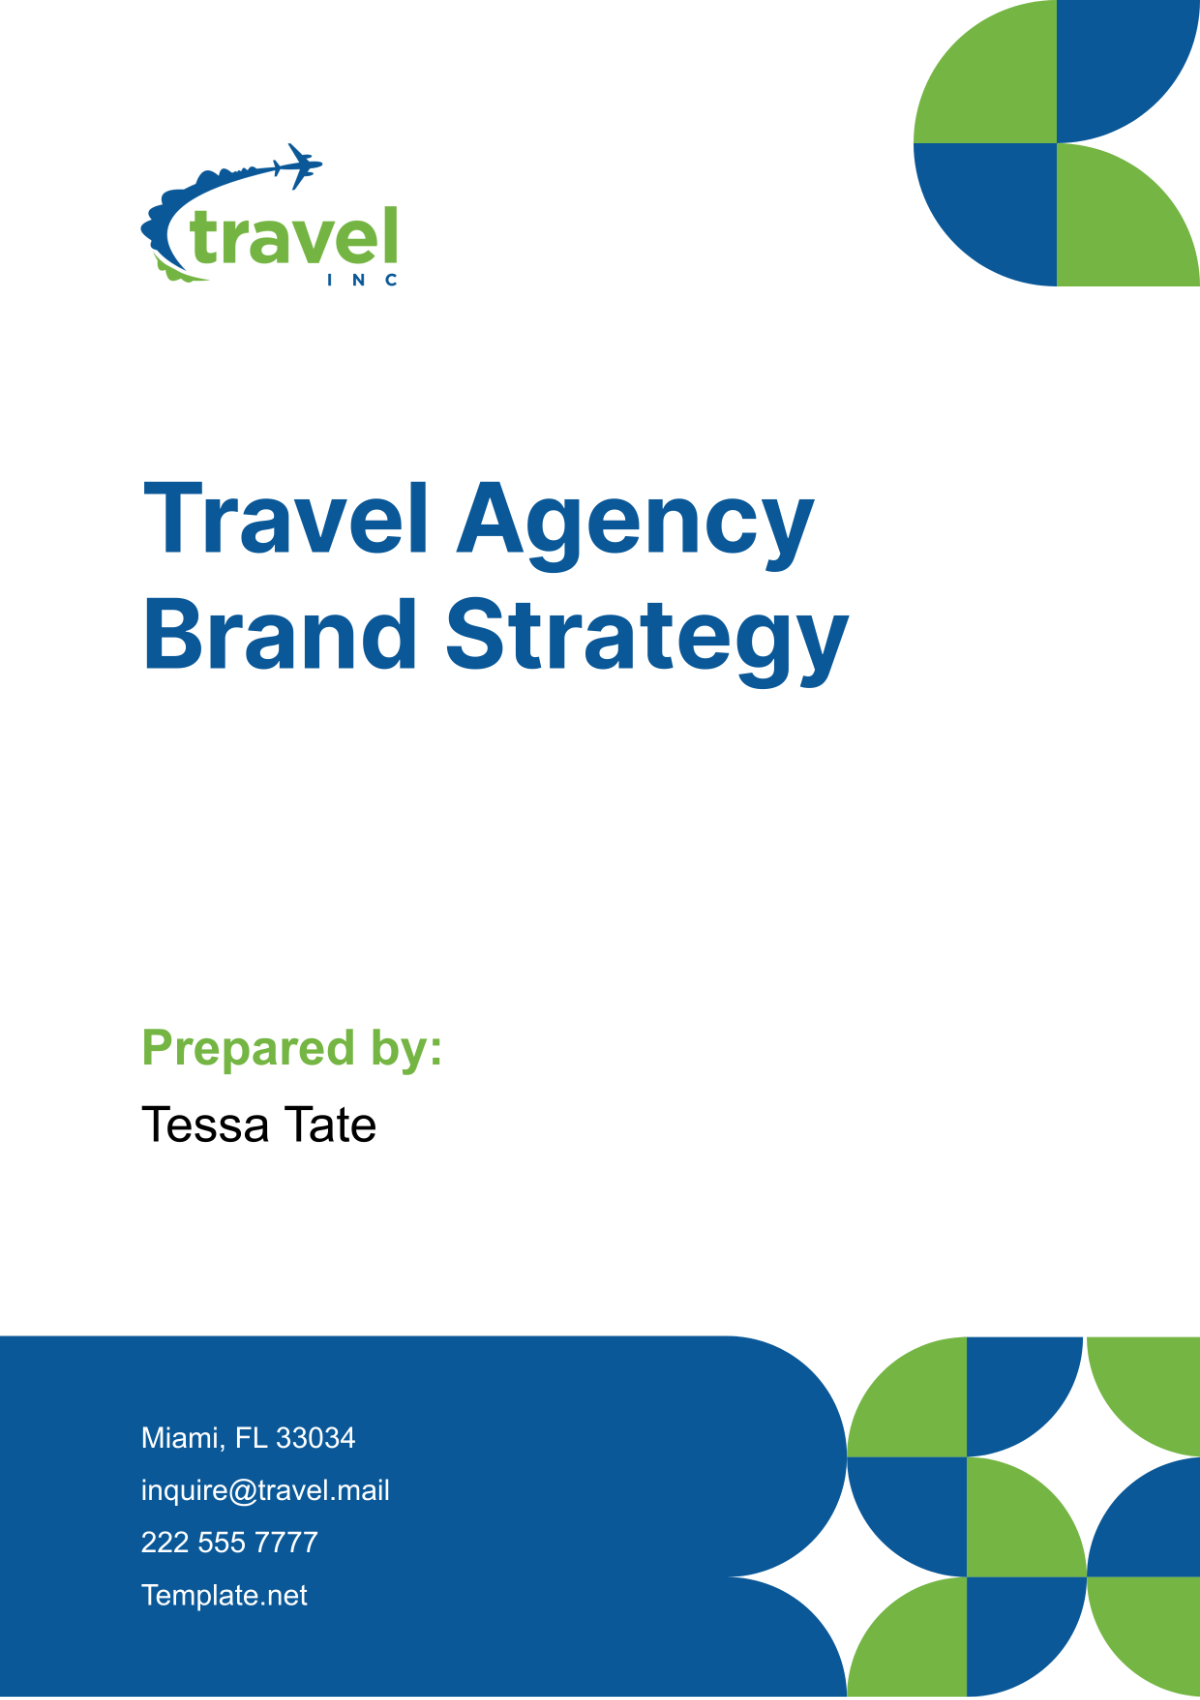 Travel Agency Brand Strategy Template